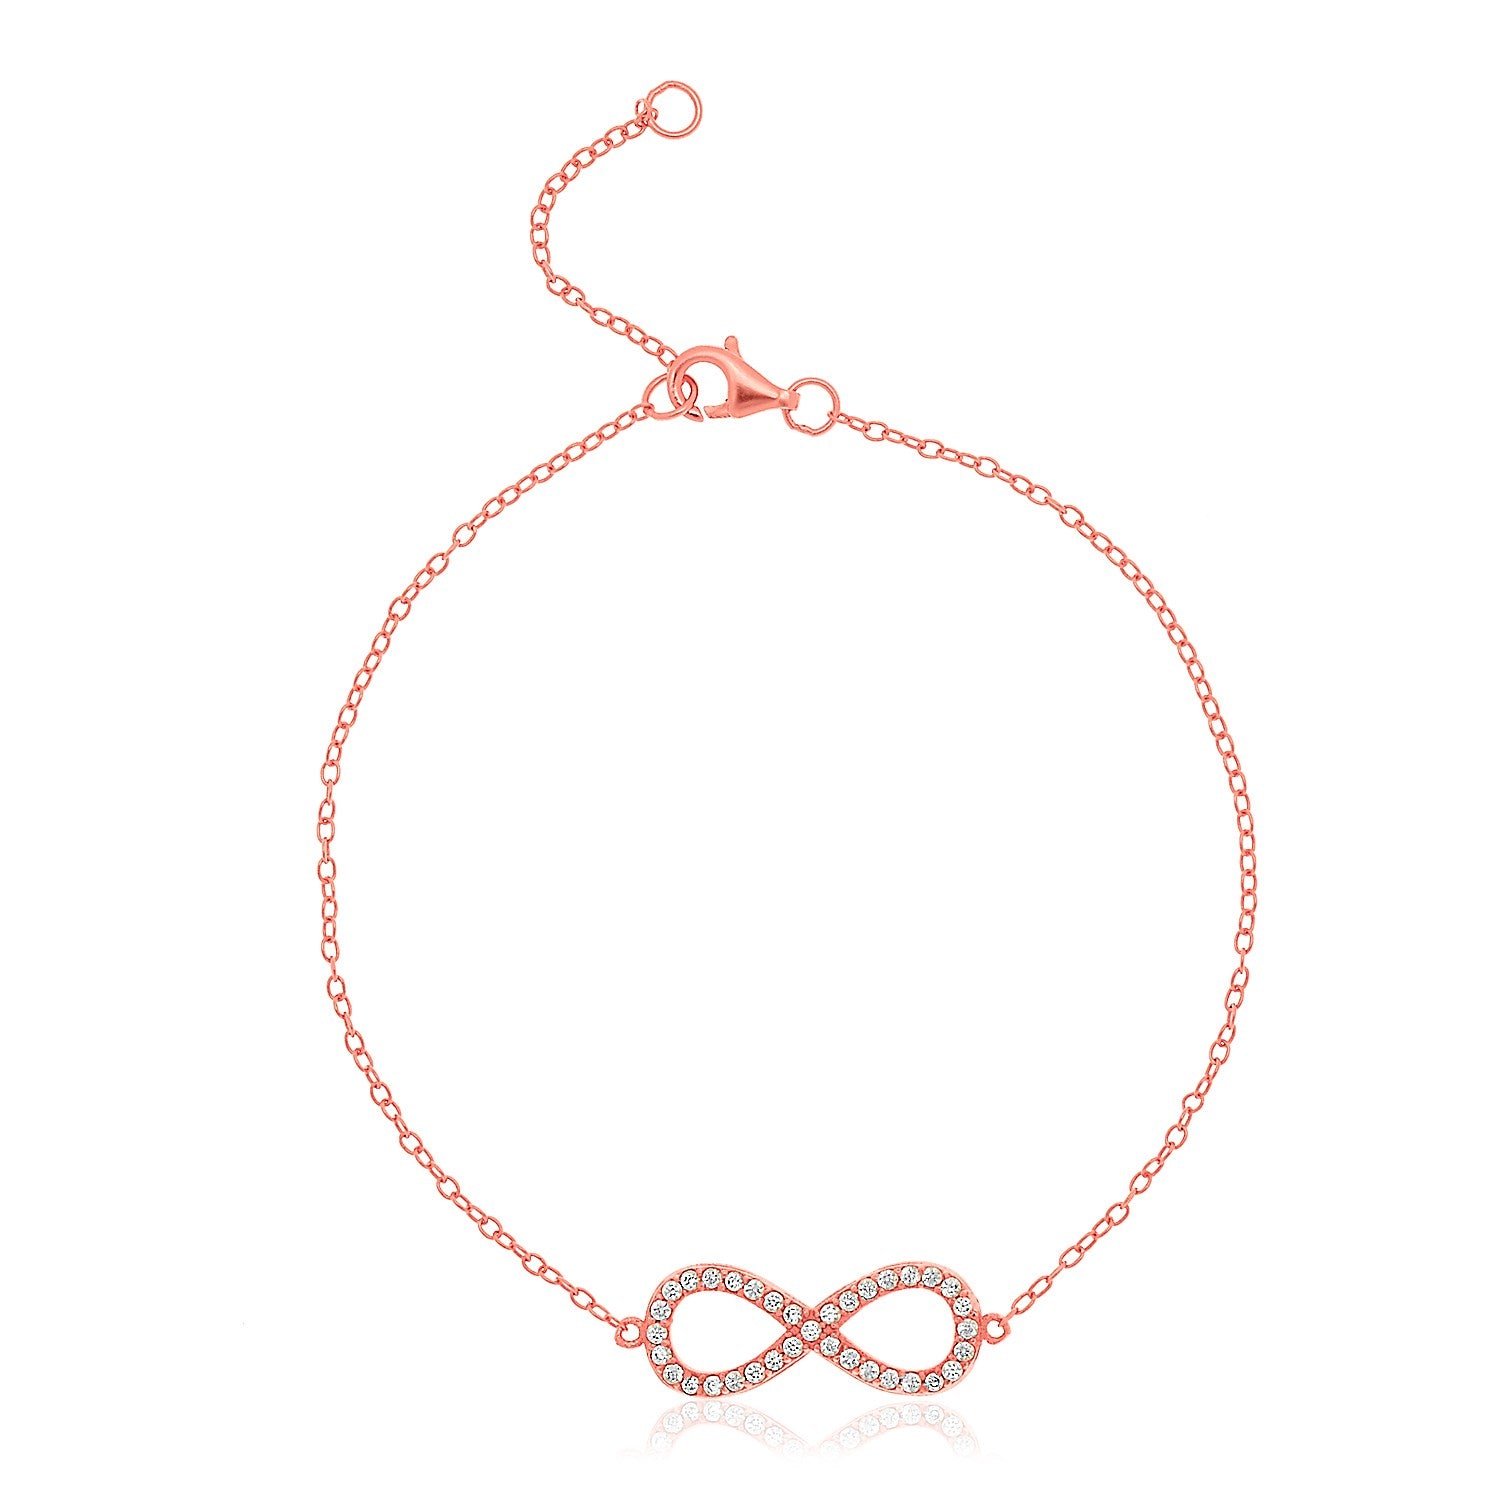 Sterling Silver Rose Toned Infinity Symbol Bracelet with Cubic Zirconias